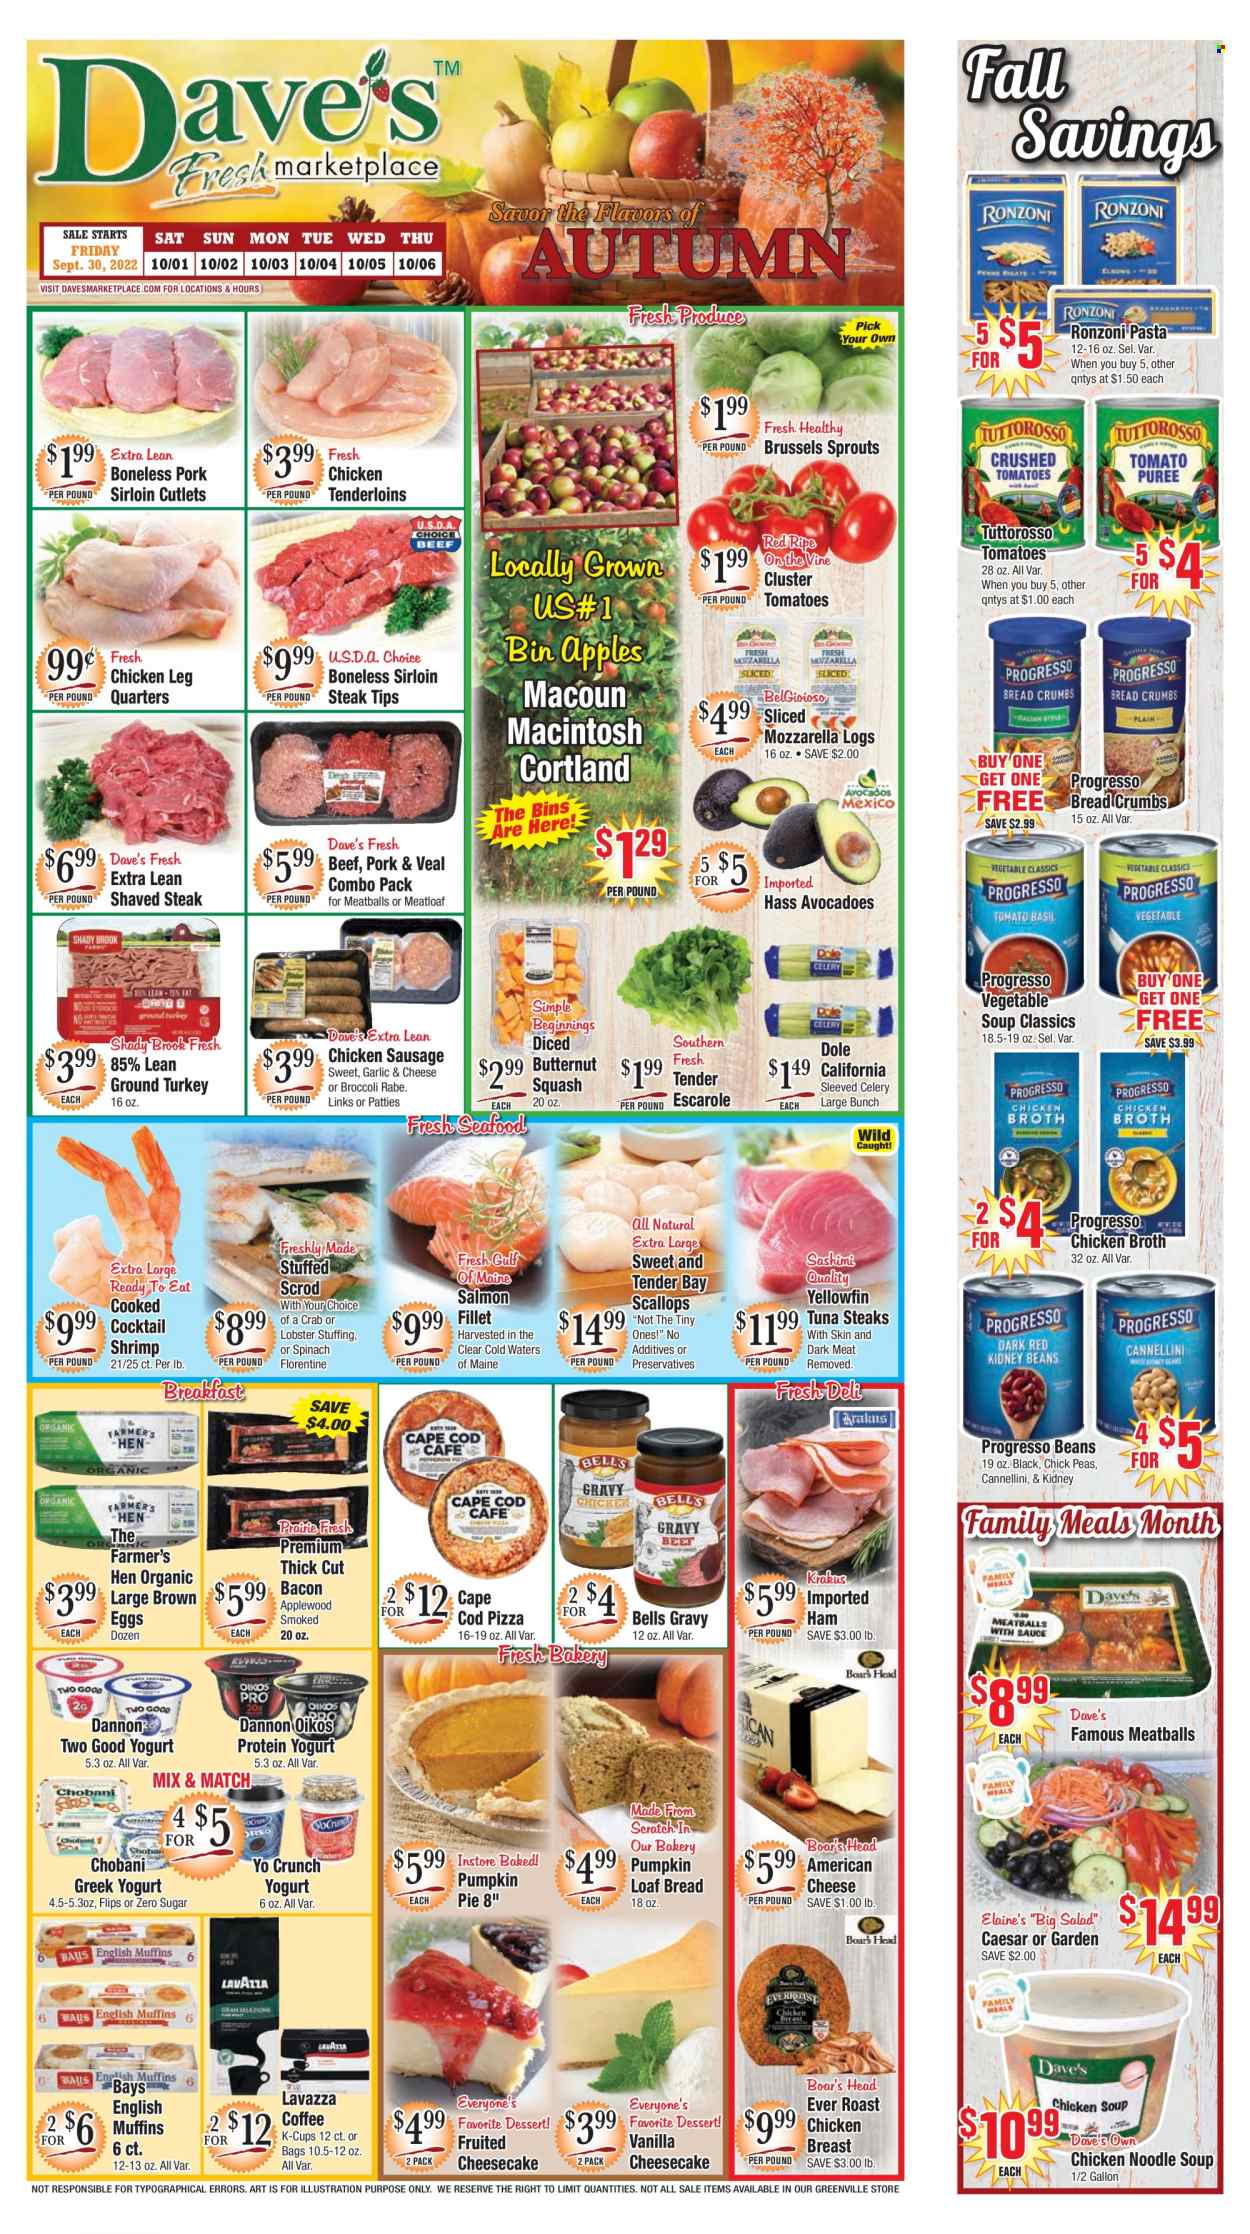 thumbnail - Dave's Fresh Marketplace Flyer - 09/30/2022 - 10/06/2022 - Sales products - english muffins, pie, cheesecake, breadcrumbs, broccoli, celery, pumpkin, salad, Dole, brussel sprouts, broccolini, sleeved celery, apples, cod, lobster, salmon, salmon fillet, scallops, tuna, seafood, crab, shrimps, vegetable soup, pizza, chicken roast, meatballs, soup, pasta, noodles cup, meatloaf, noodles, Progresso, bacon, ham, sausage, chicken sausage, american cheese, greek yoghurt, yoghurt, Oikos, Chobani, Dannon, eggs, chicken broth, broth, coffee, coffee capsules, K-Cups, Lavazza, ground turkey, chicken breasts, chicken legs, beef sirloin, steak, sirloin steak, pork loin, butternut squash. Page 1.